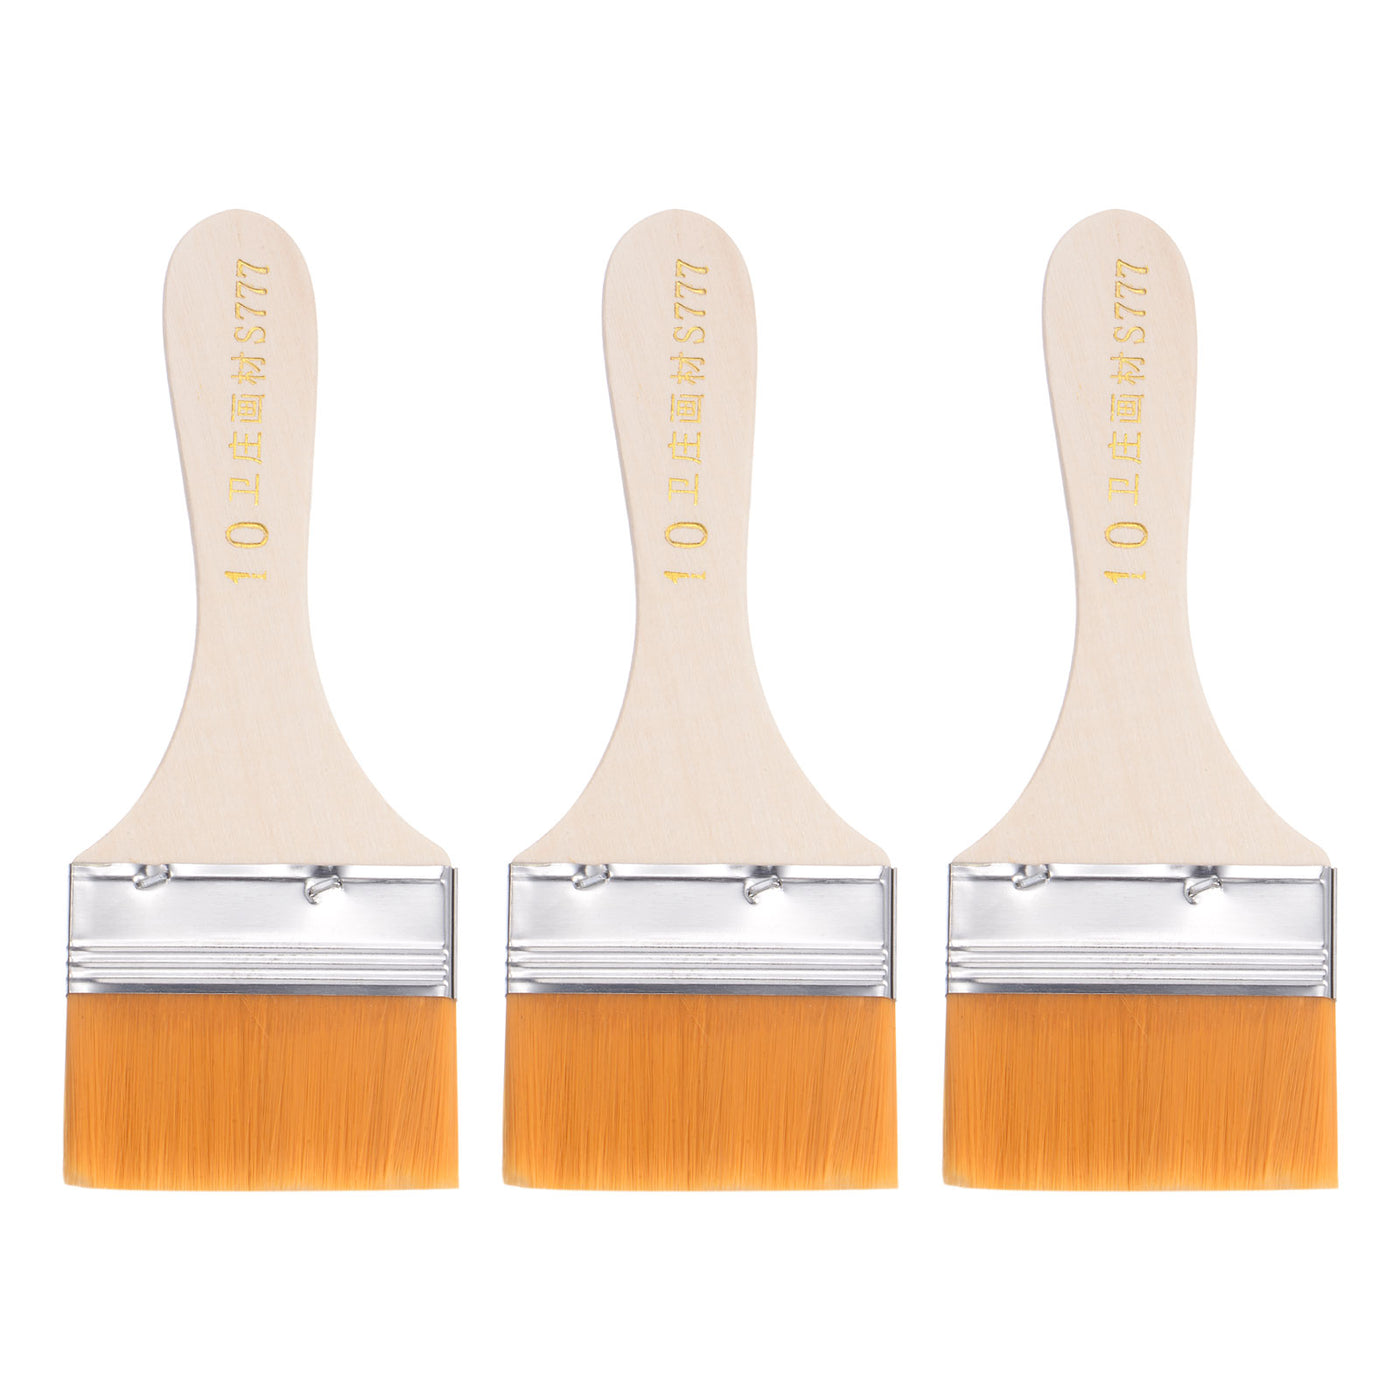 uxcell Uxcell 2.5" Width Small Paint Brush Nylon Bristle with Wood Handle Painting Tool 3Pcs